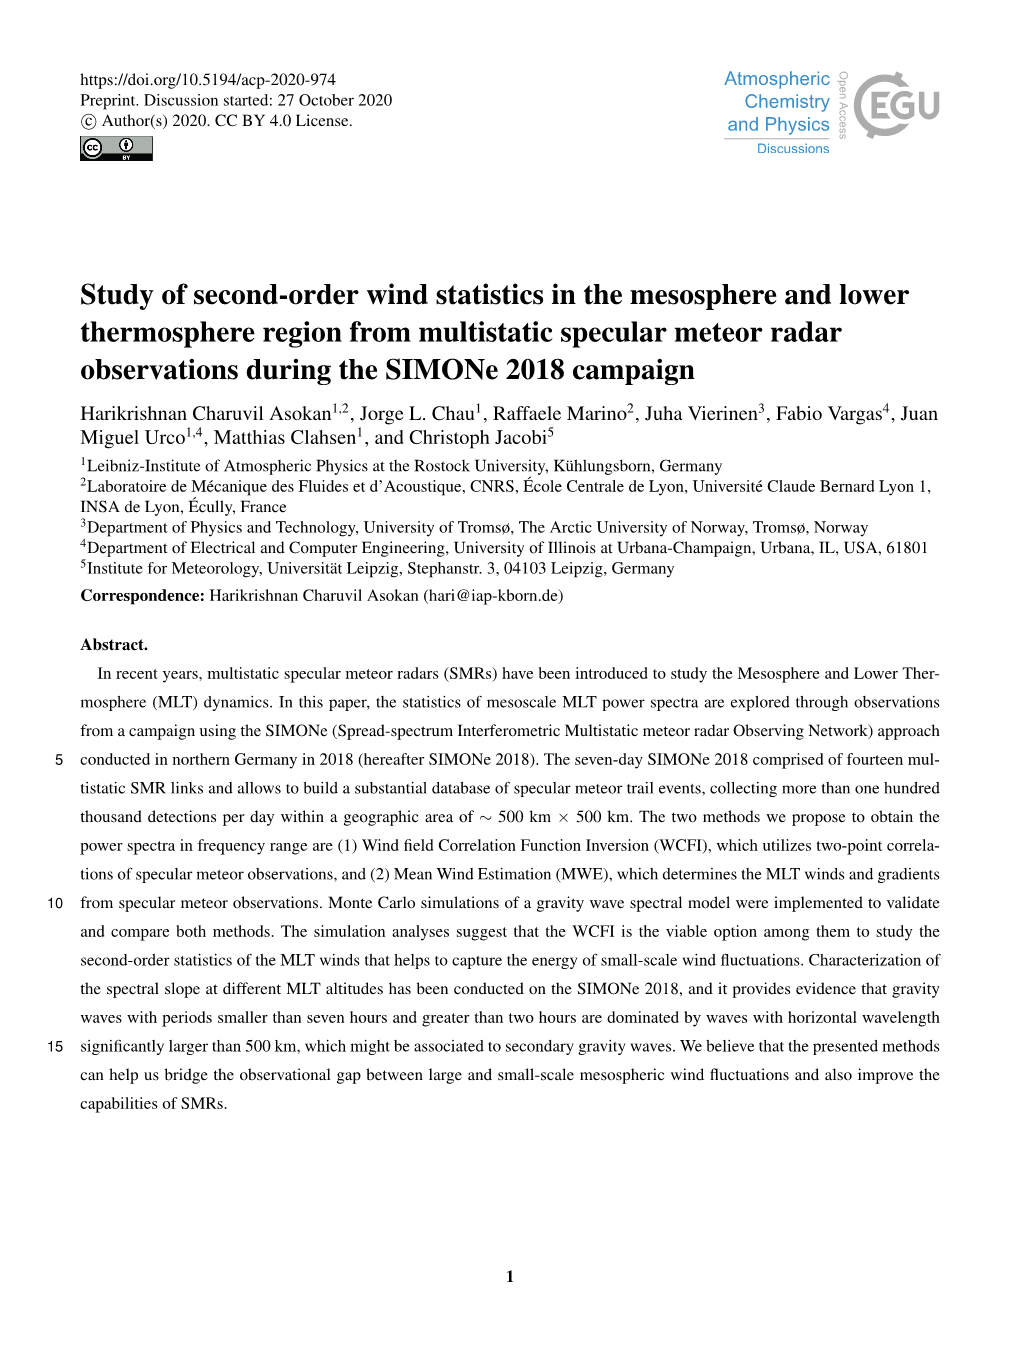 Study of Second-Order Wind Statistics in the Mesosphere and Lower